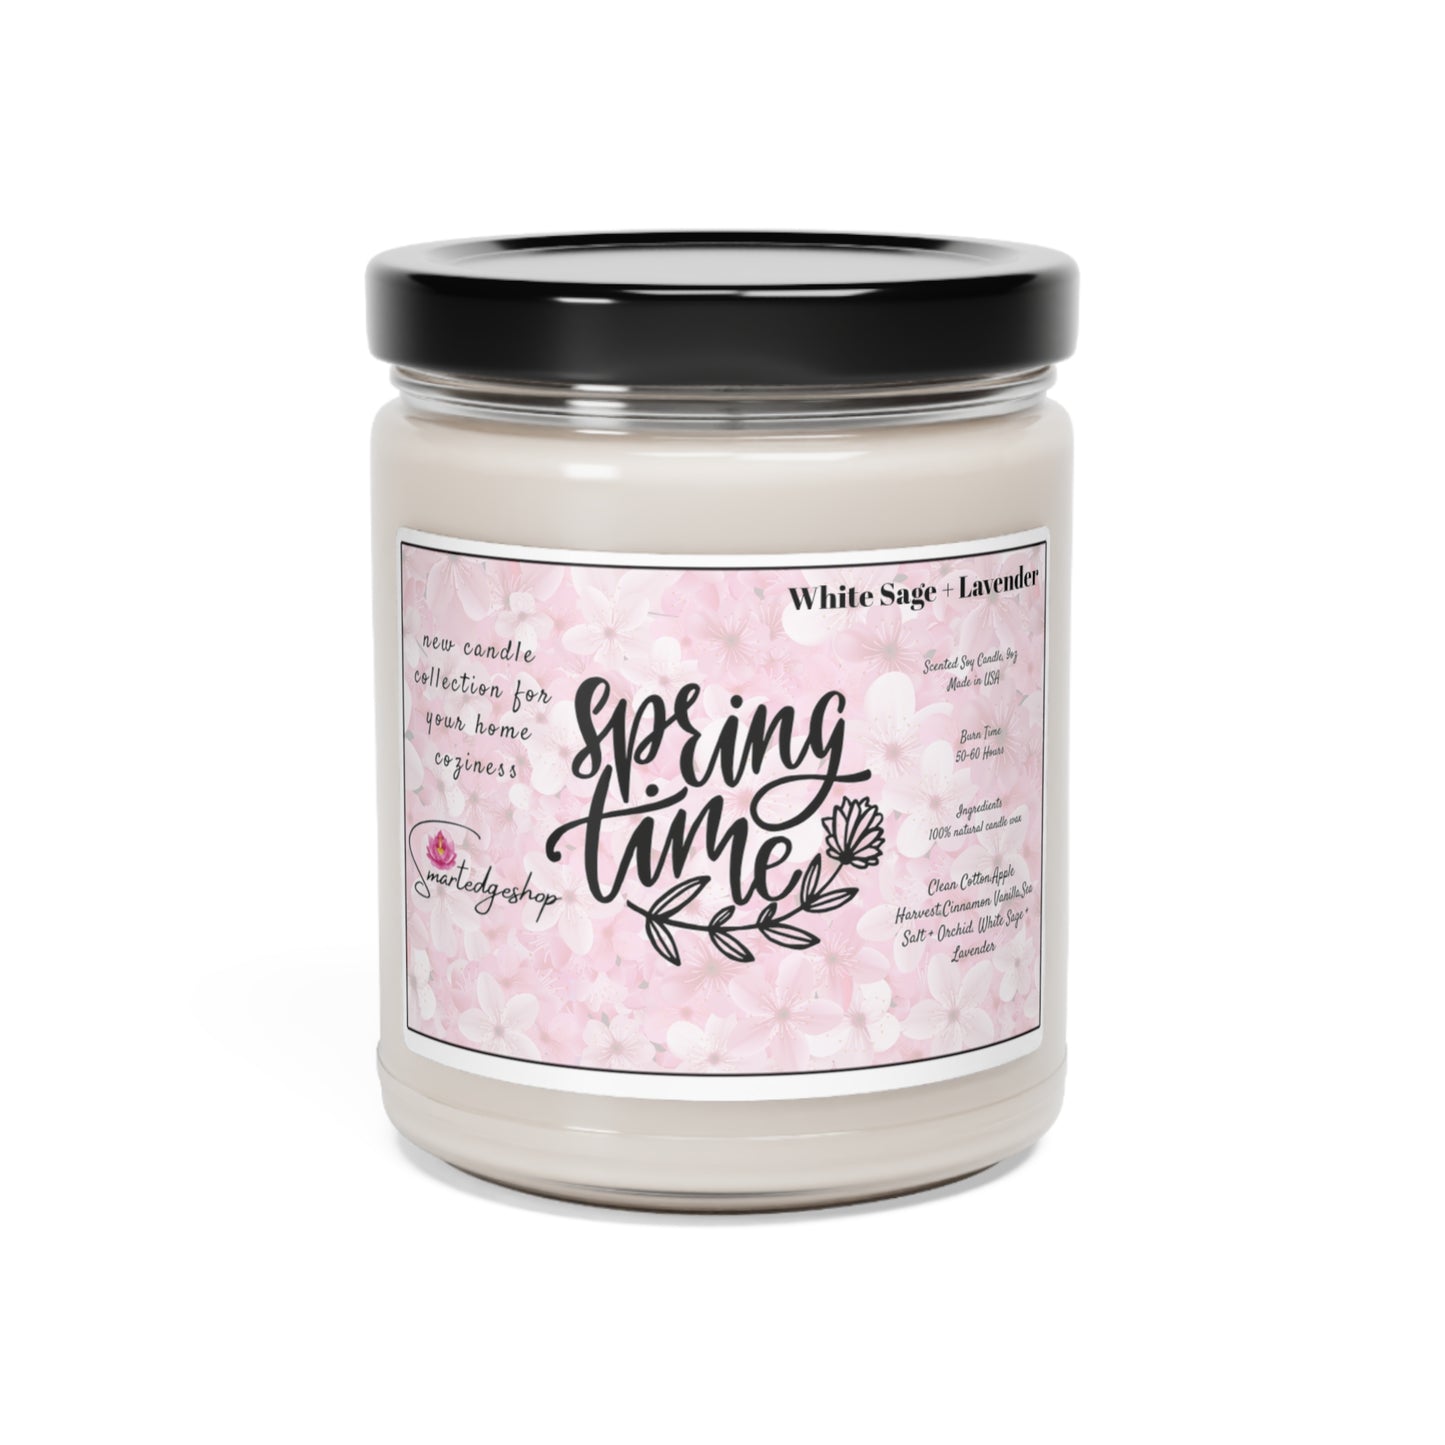 Spring Time Scented Soy Candle, 9oz